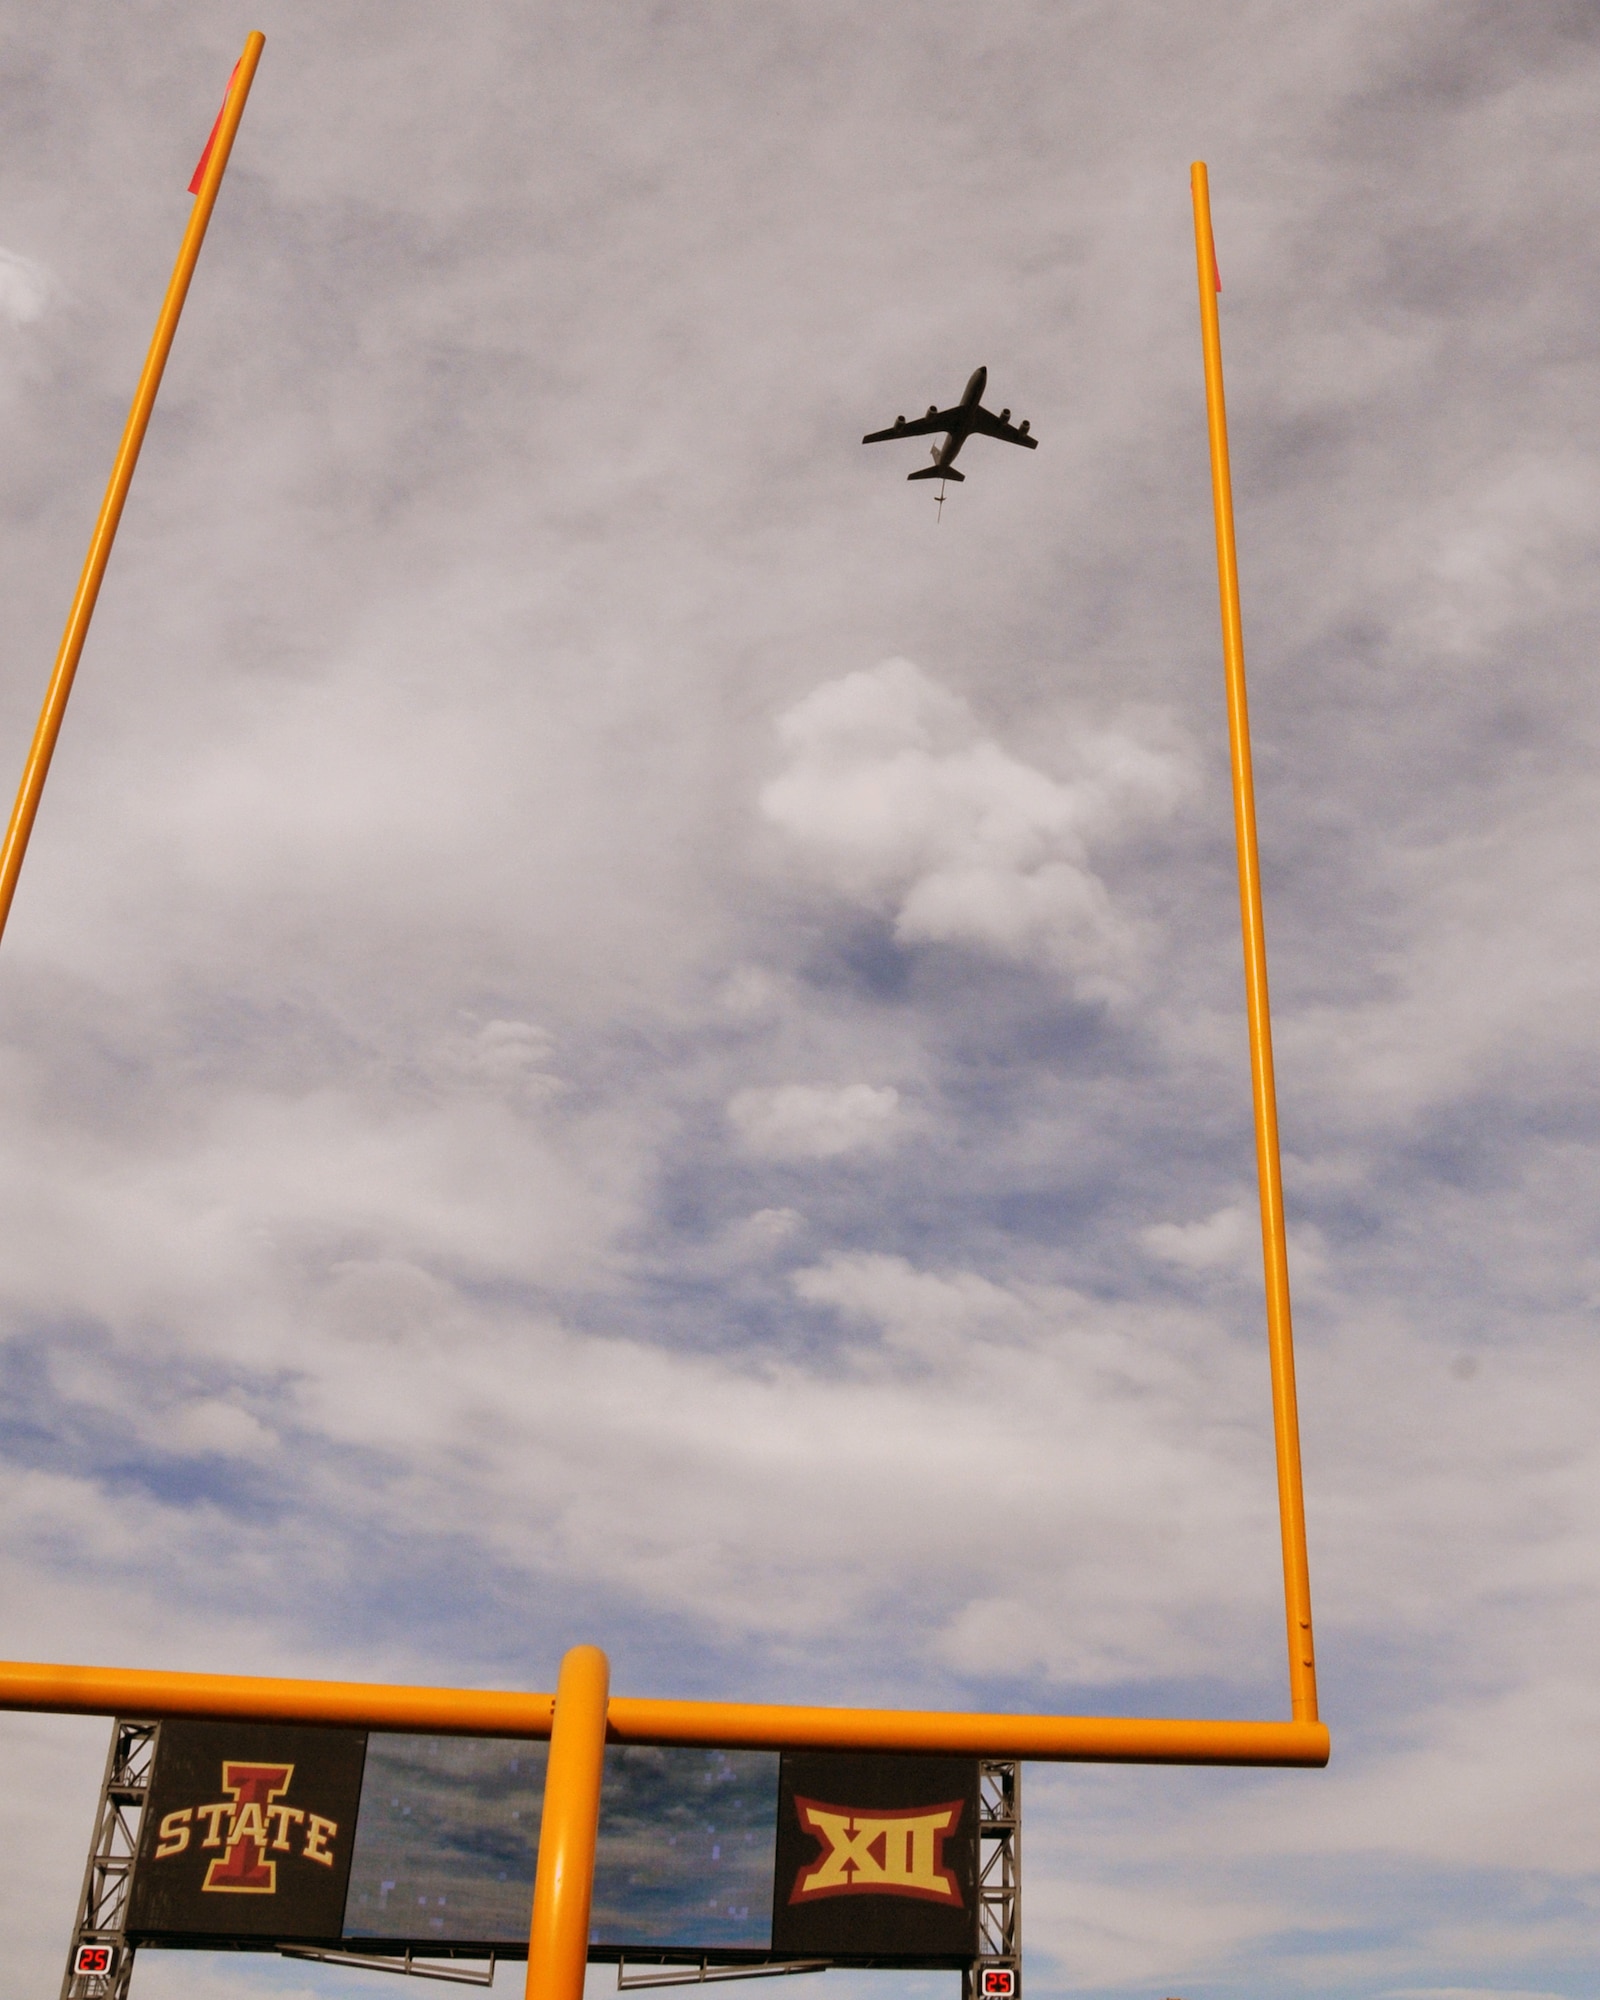 A KC-135 can been seen through the goal posts at Jack Trice Stadium in Ames, Iowa as it passes overhead.